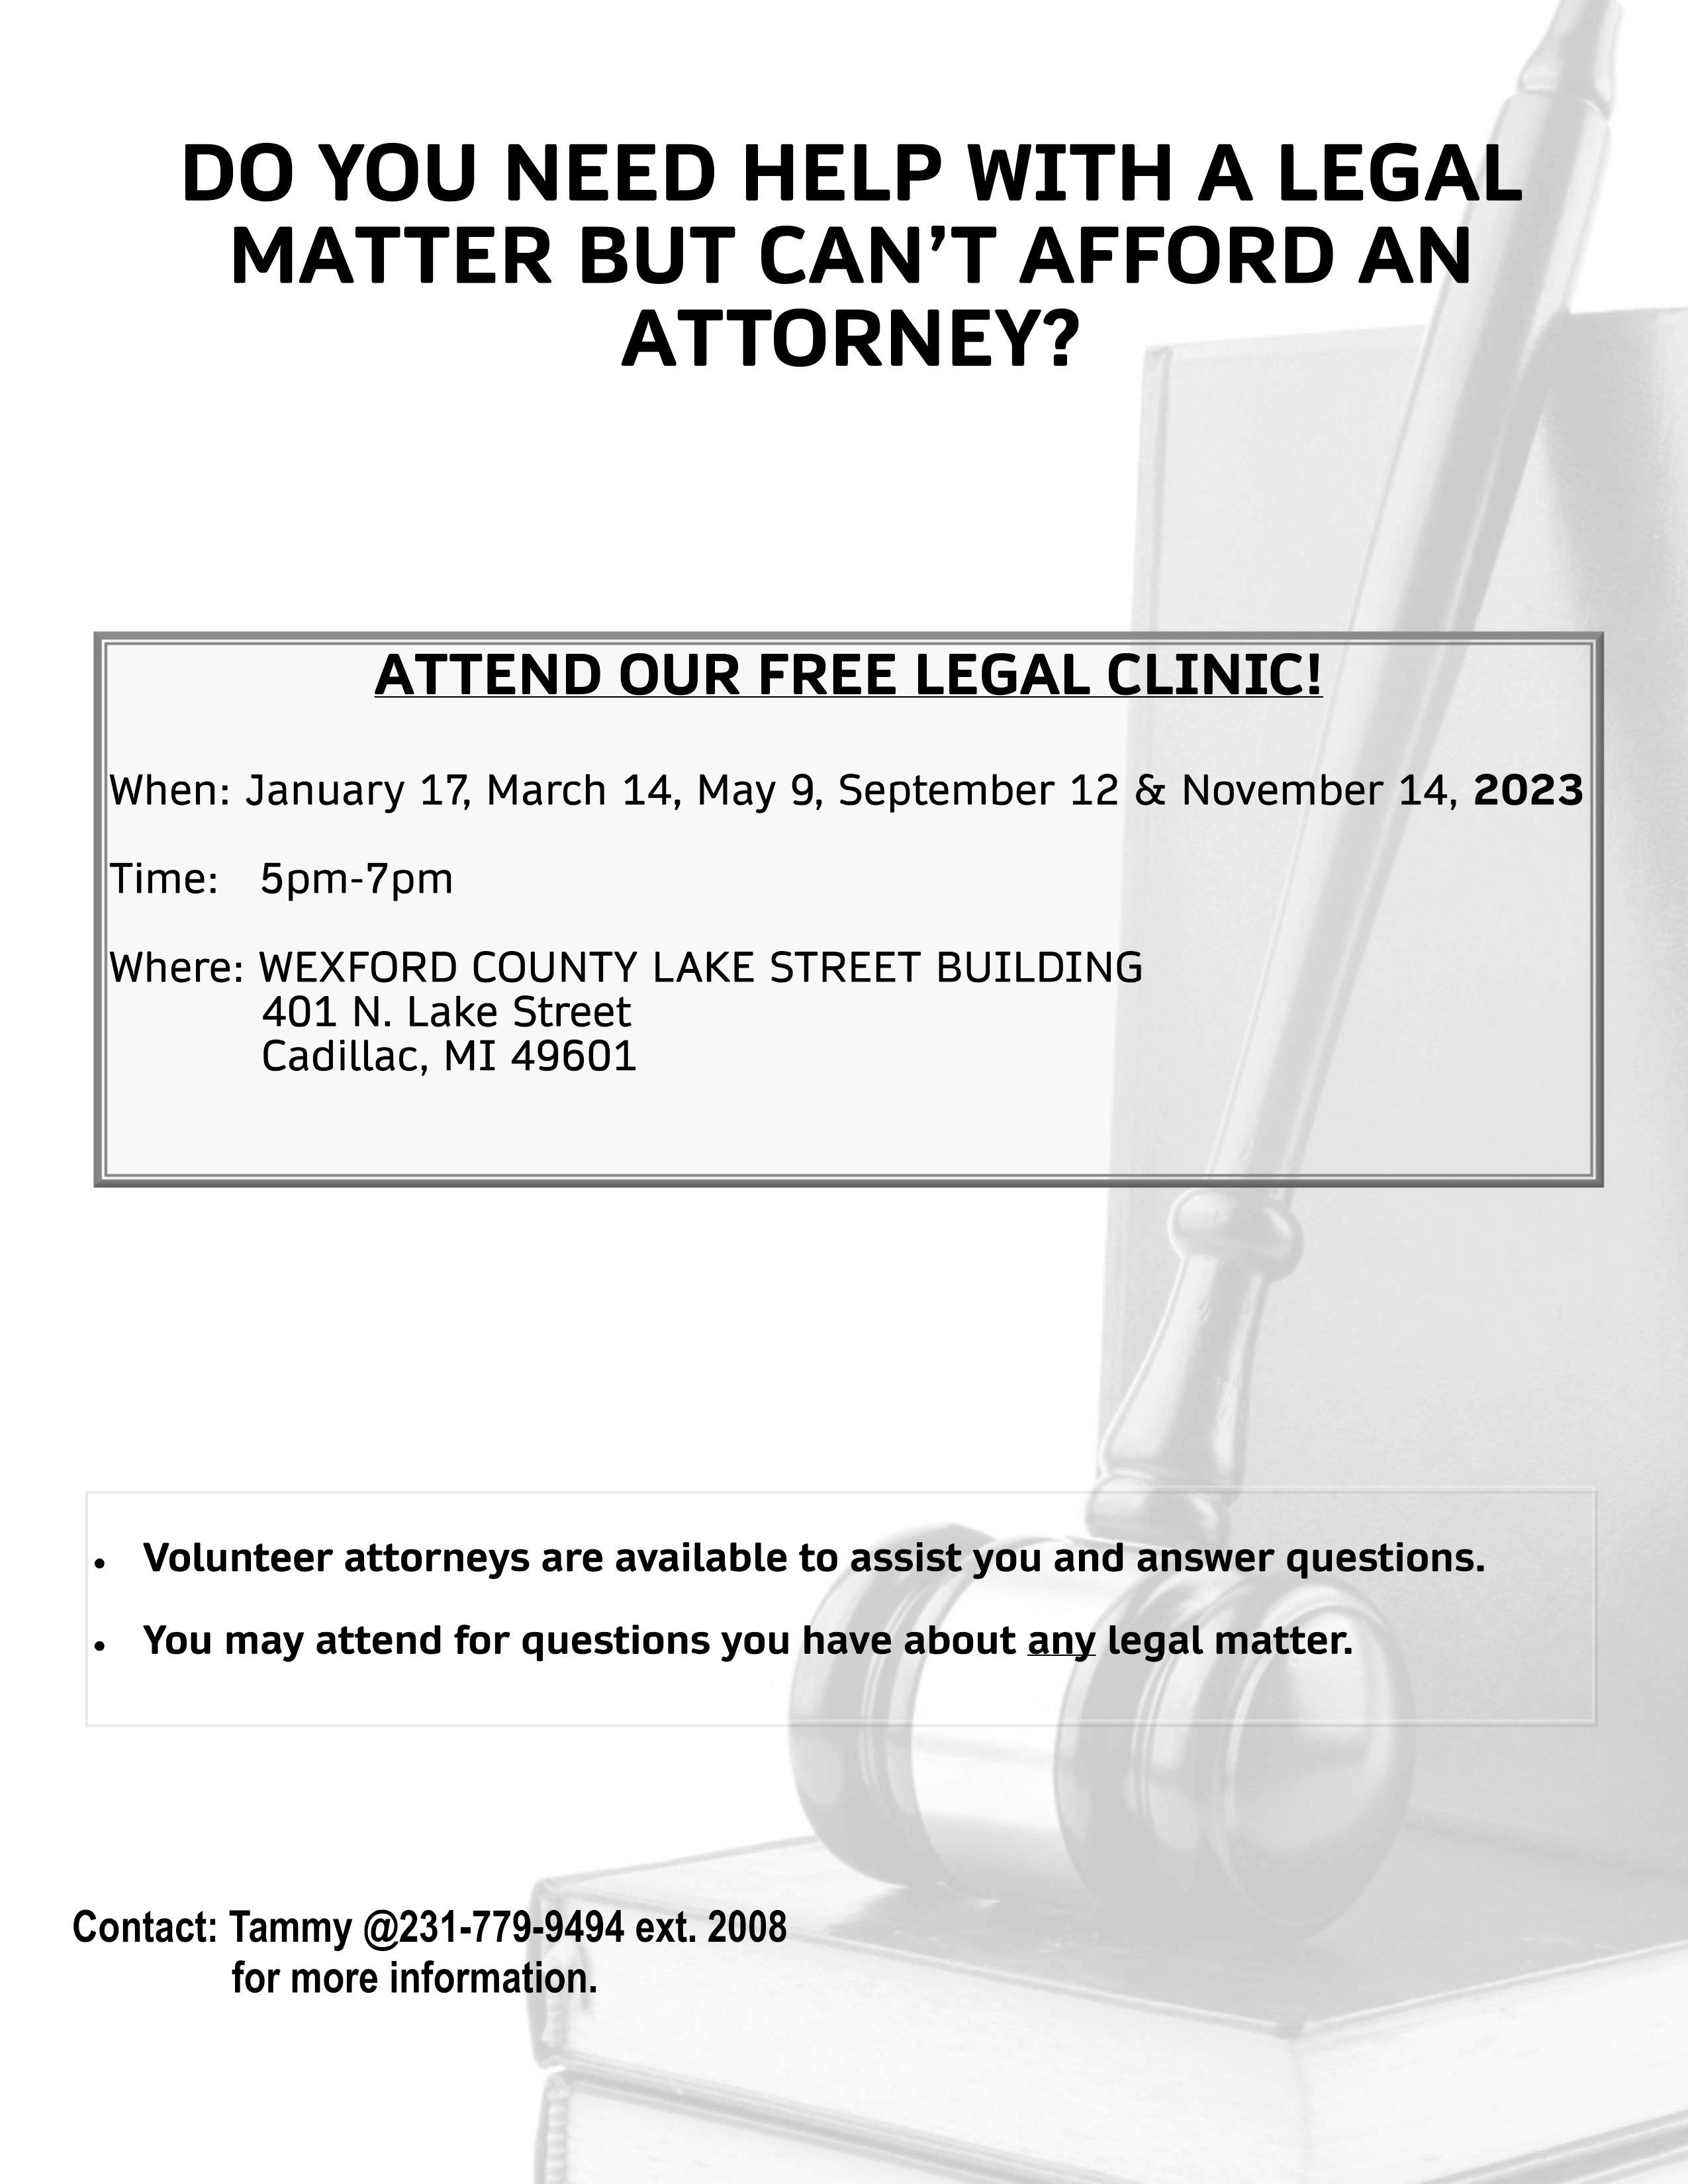 Free Legal Clinic - Wexford County Lake Street Building